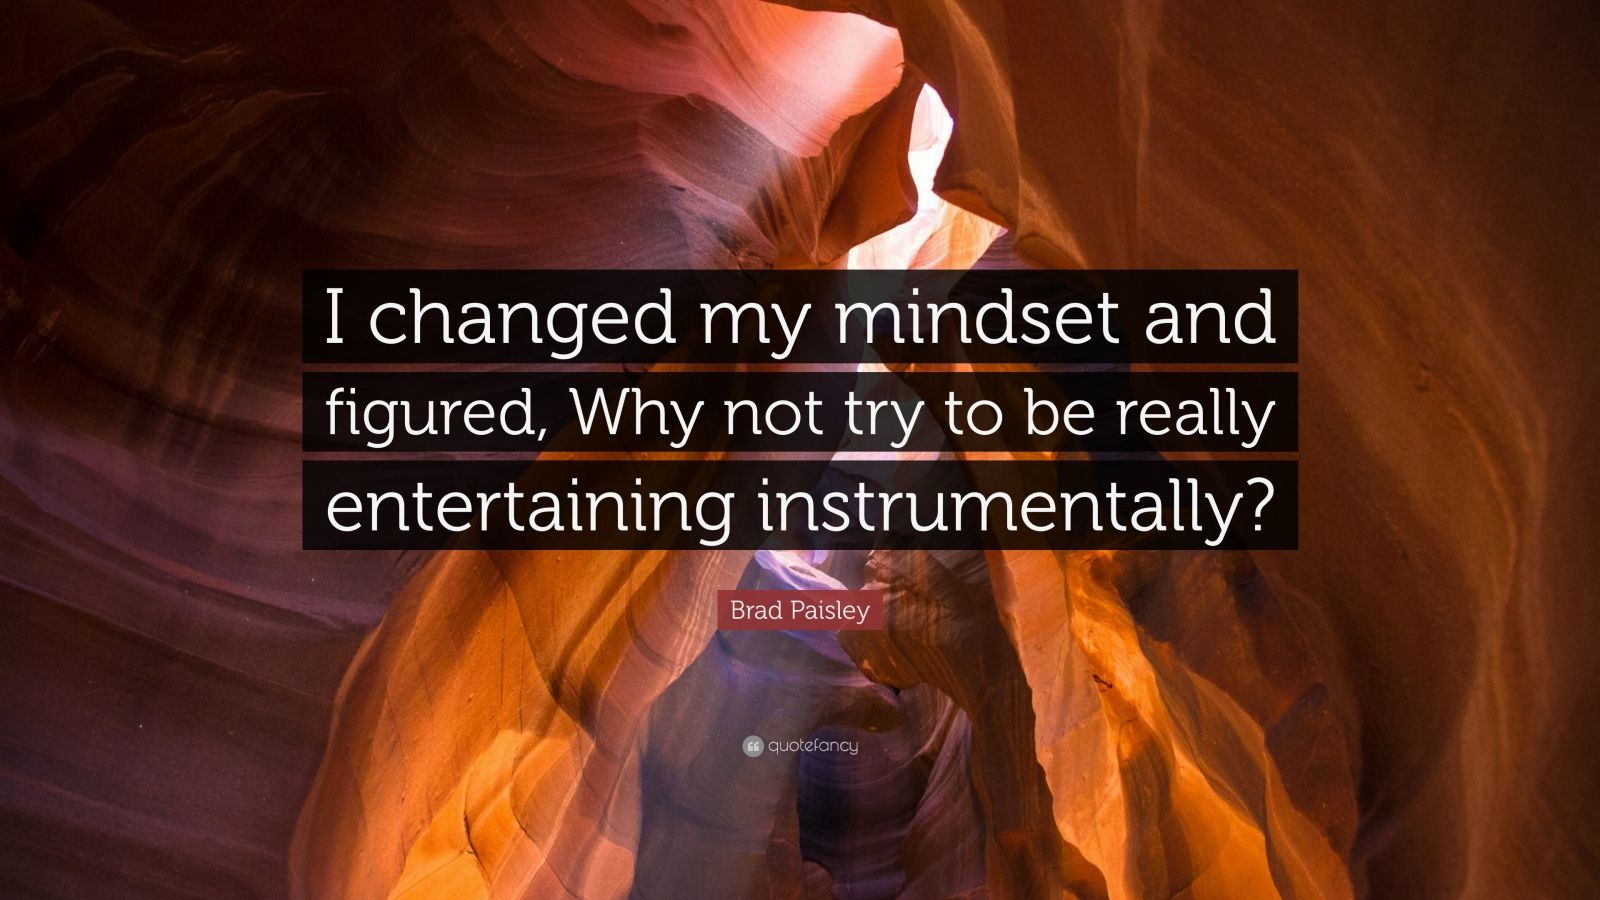 Brad Paisley Quote: “I changed my mindset and figured, Why not try to